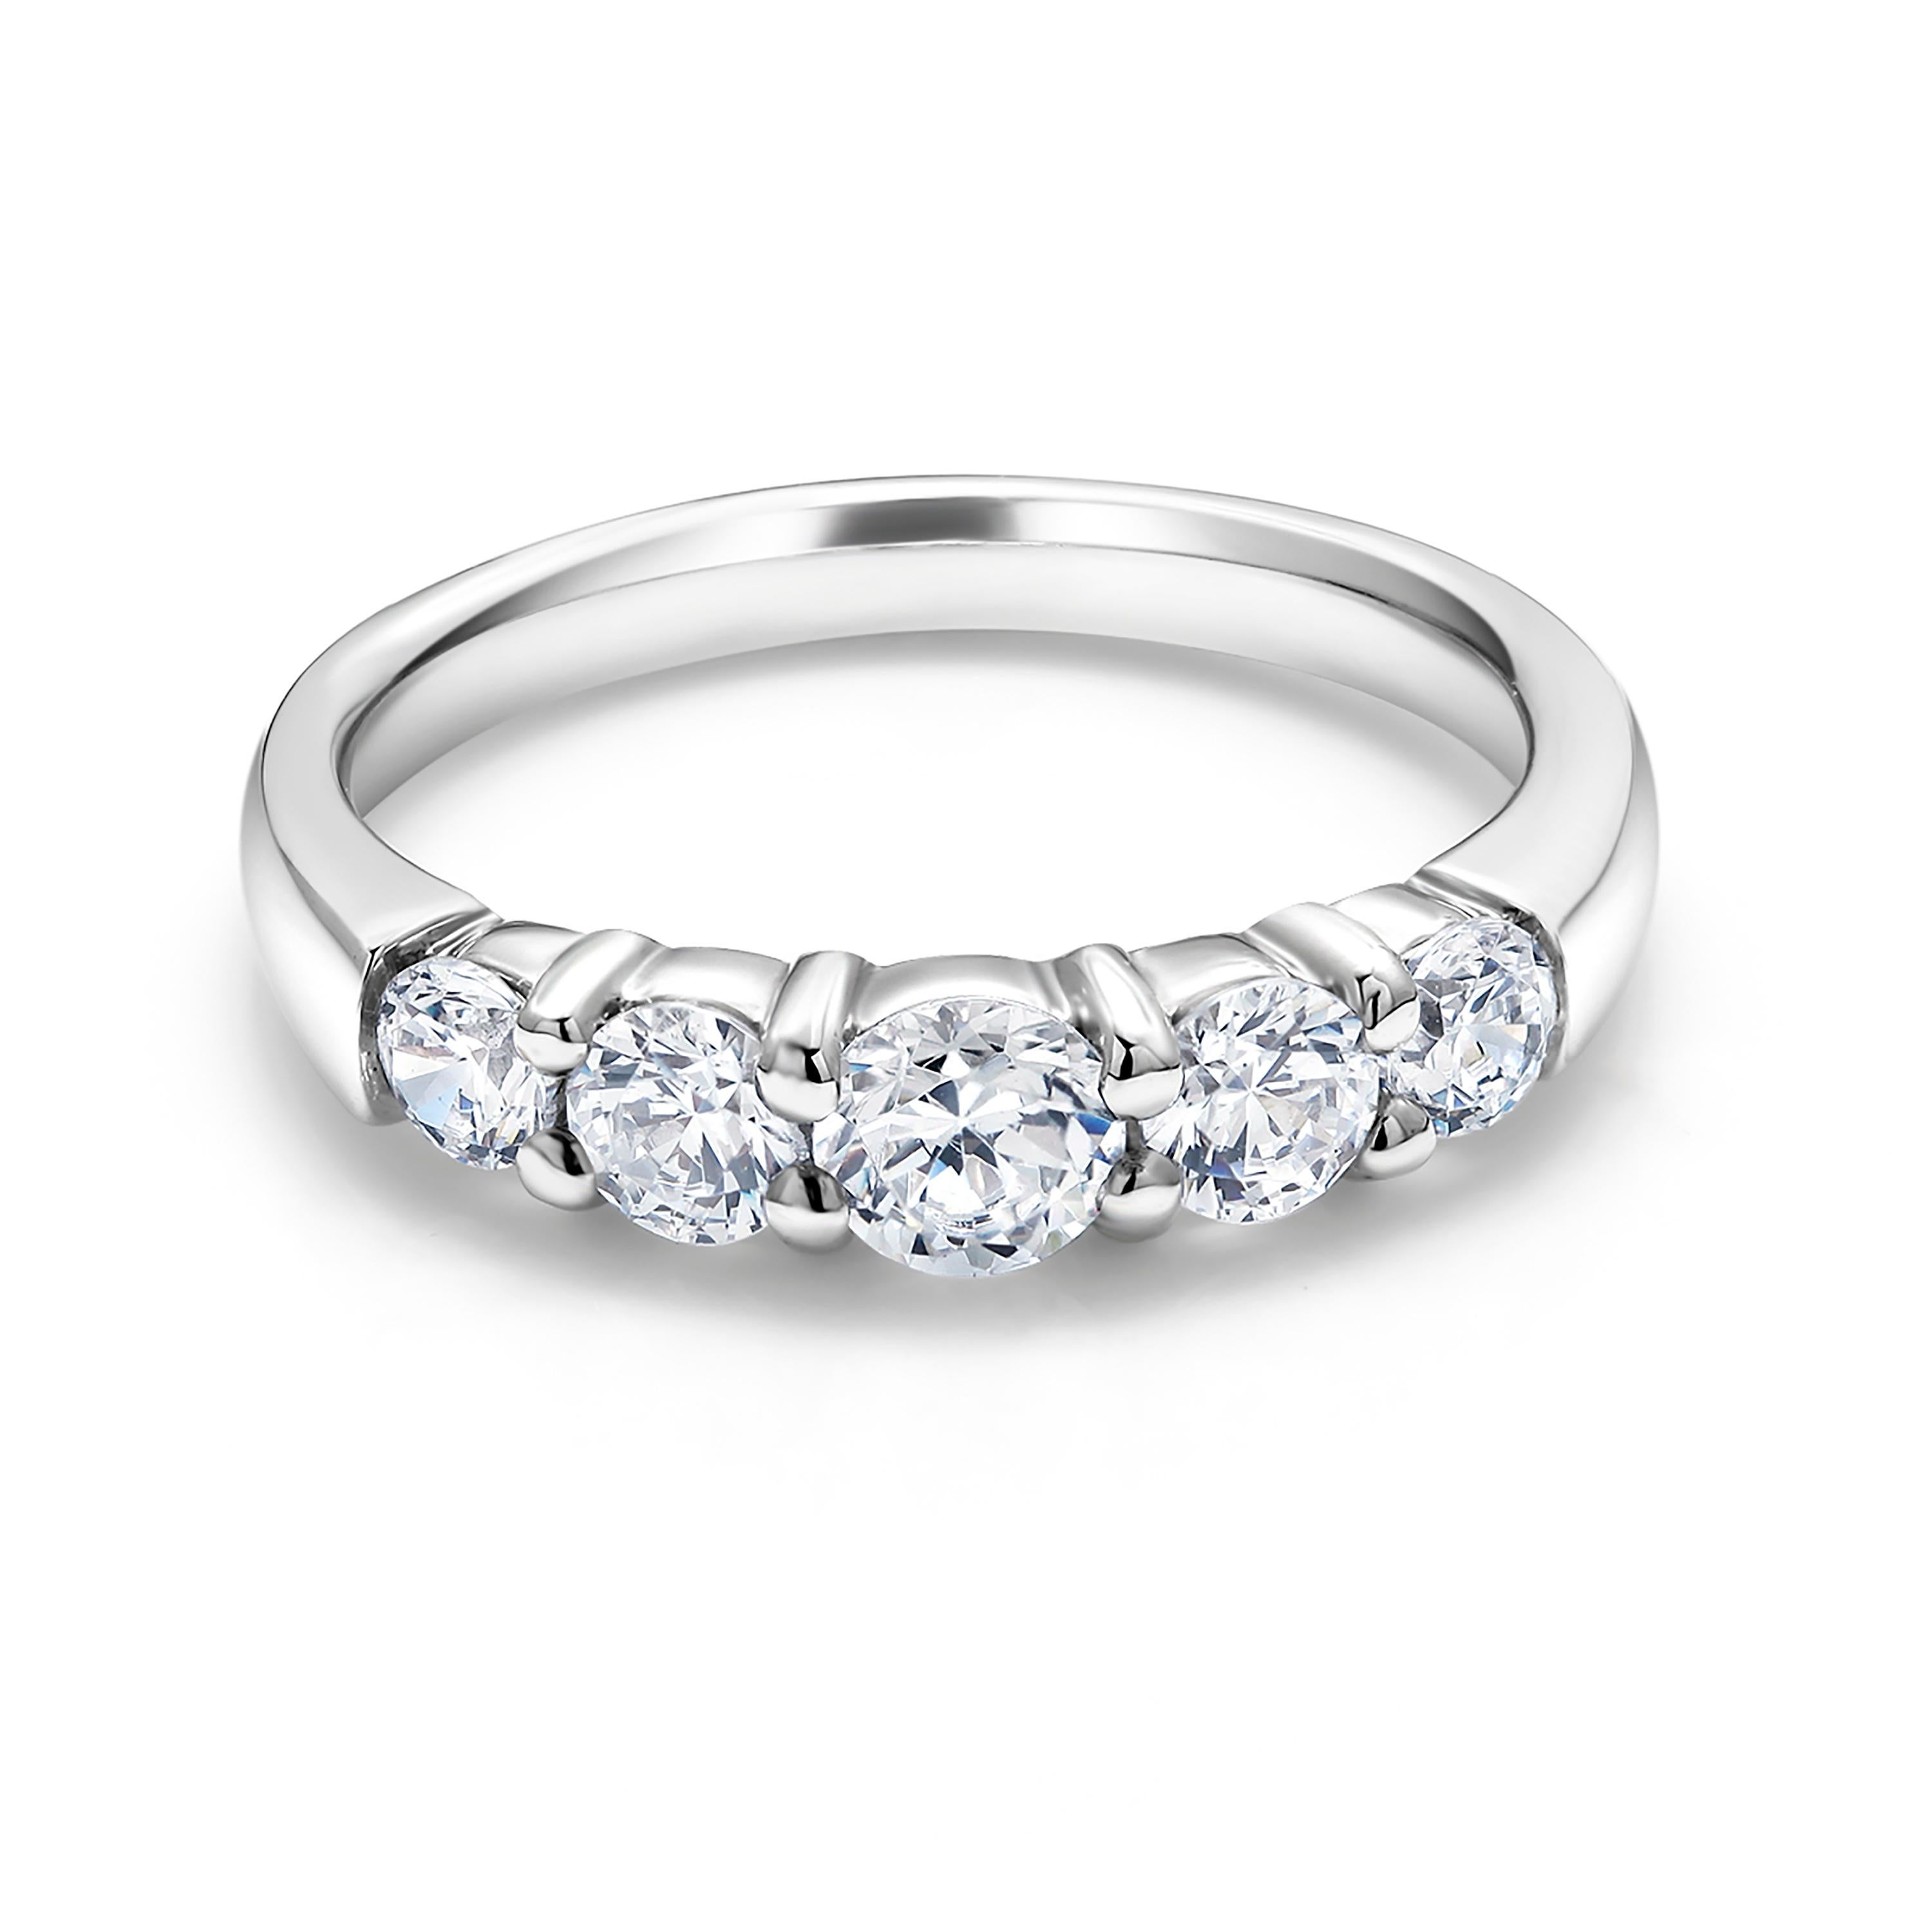 Eighteen Karats white gold graduating round diamond prong set partial ring
Five diamonds weighing 1.15 carat 
The Center diamond weighs 0.35, two side diamonds weight 0.50, and two end diamonds weight 0.30
Made to order in all finger sizes
Two weeks